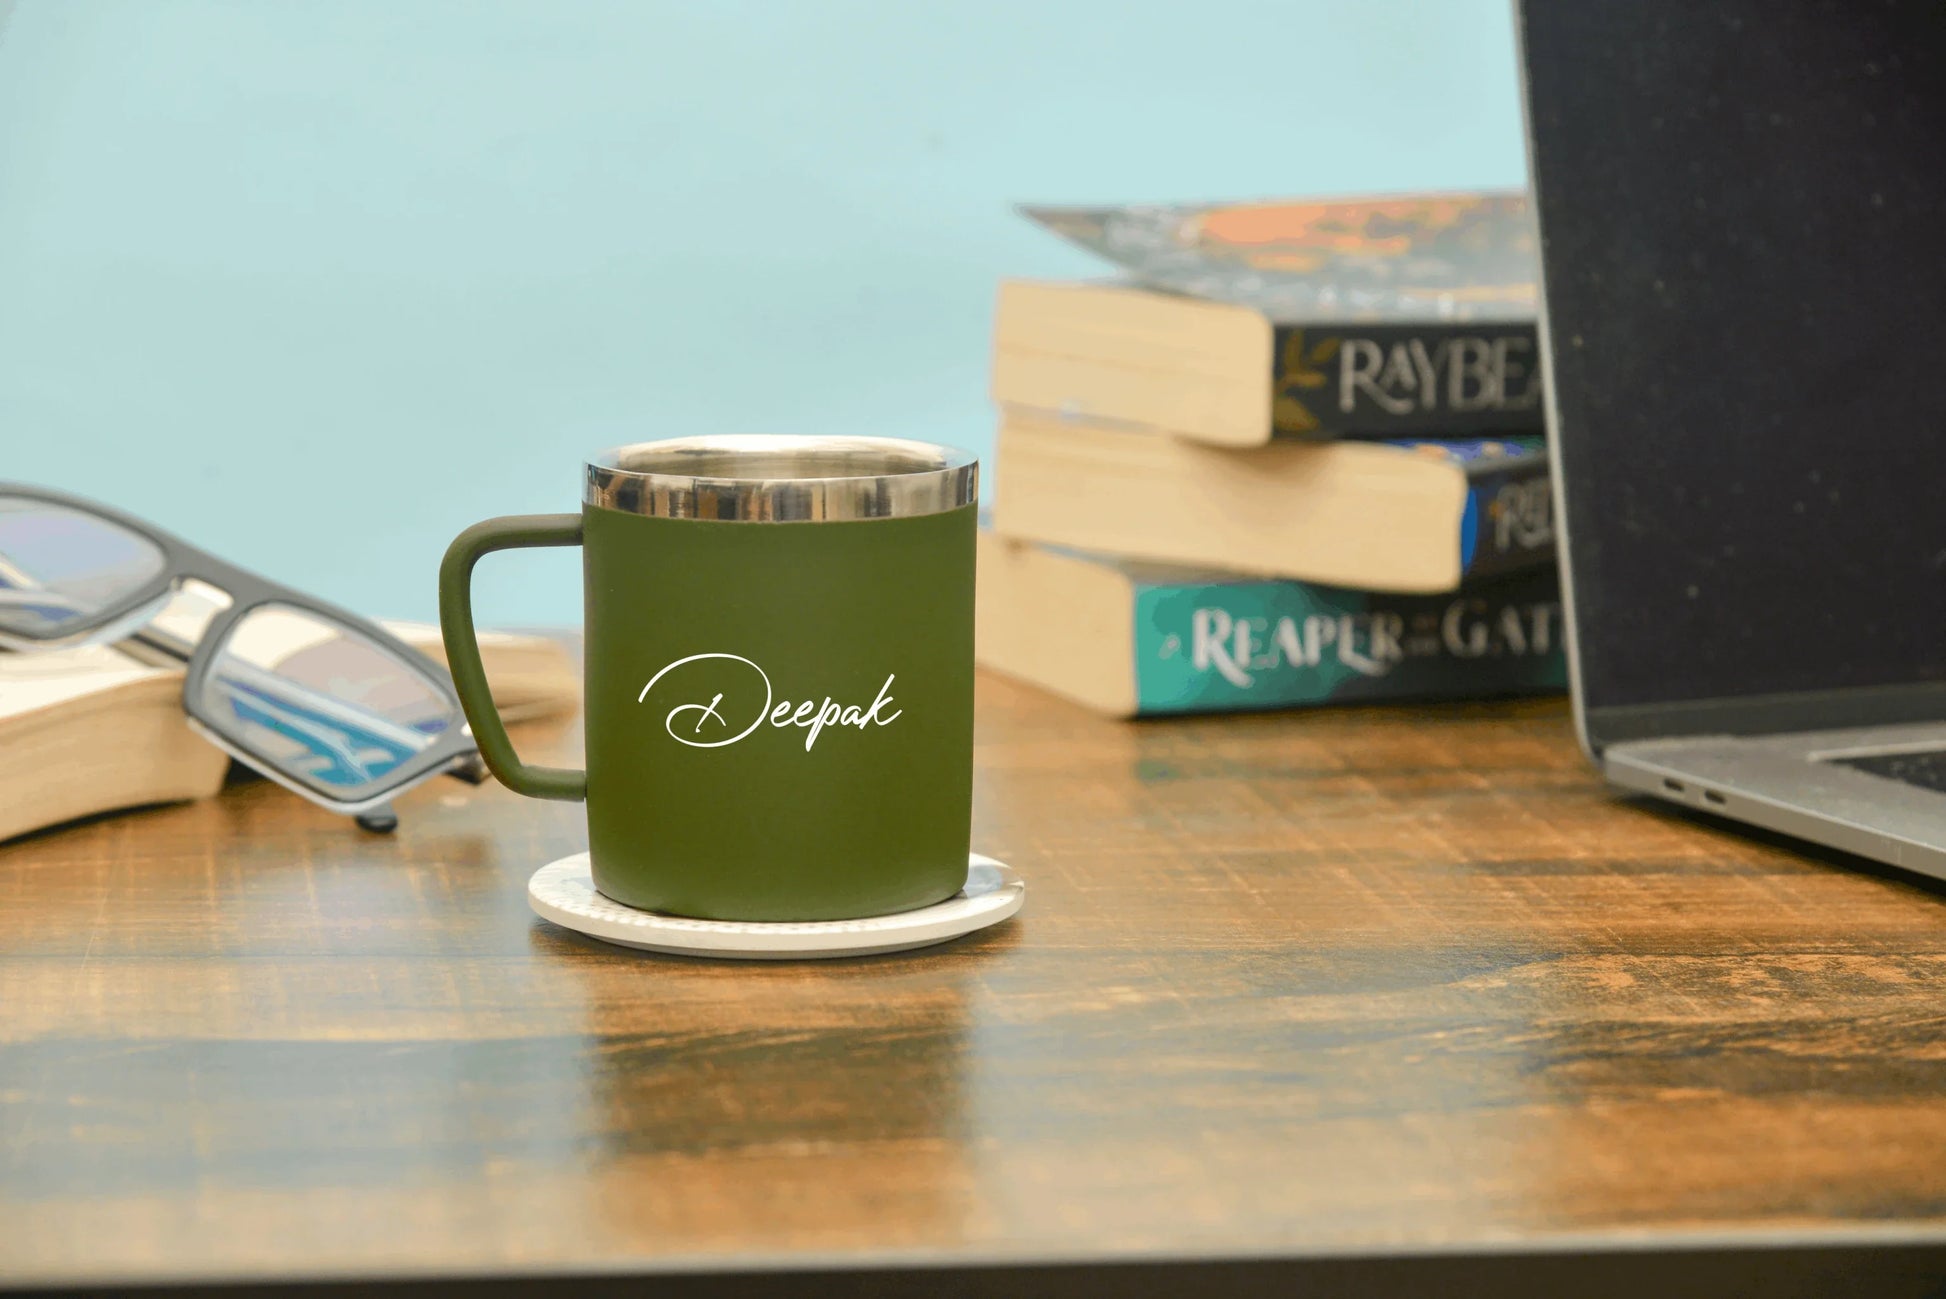 Custom with name tag, gift this amazing mug glossy in outlook and satisfying to touch, decked with plethora of love 